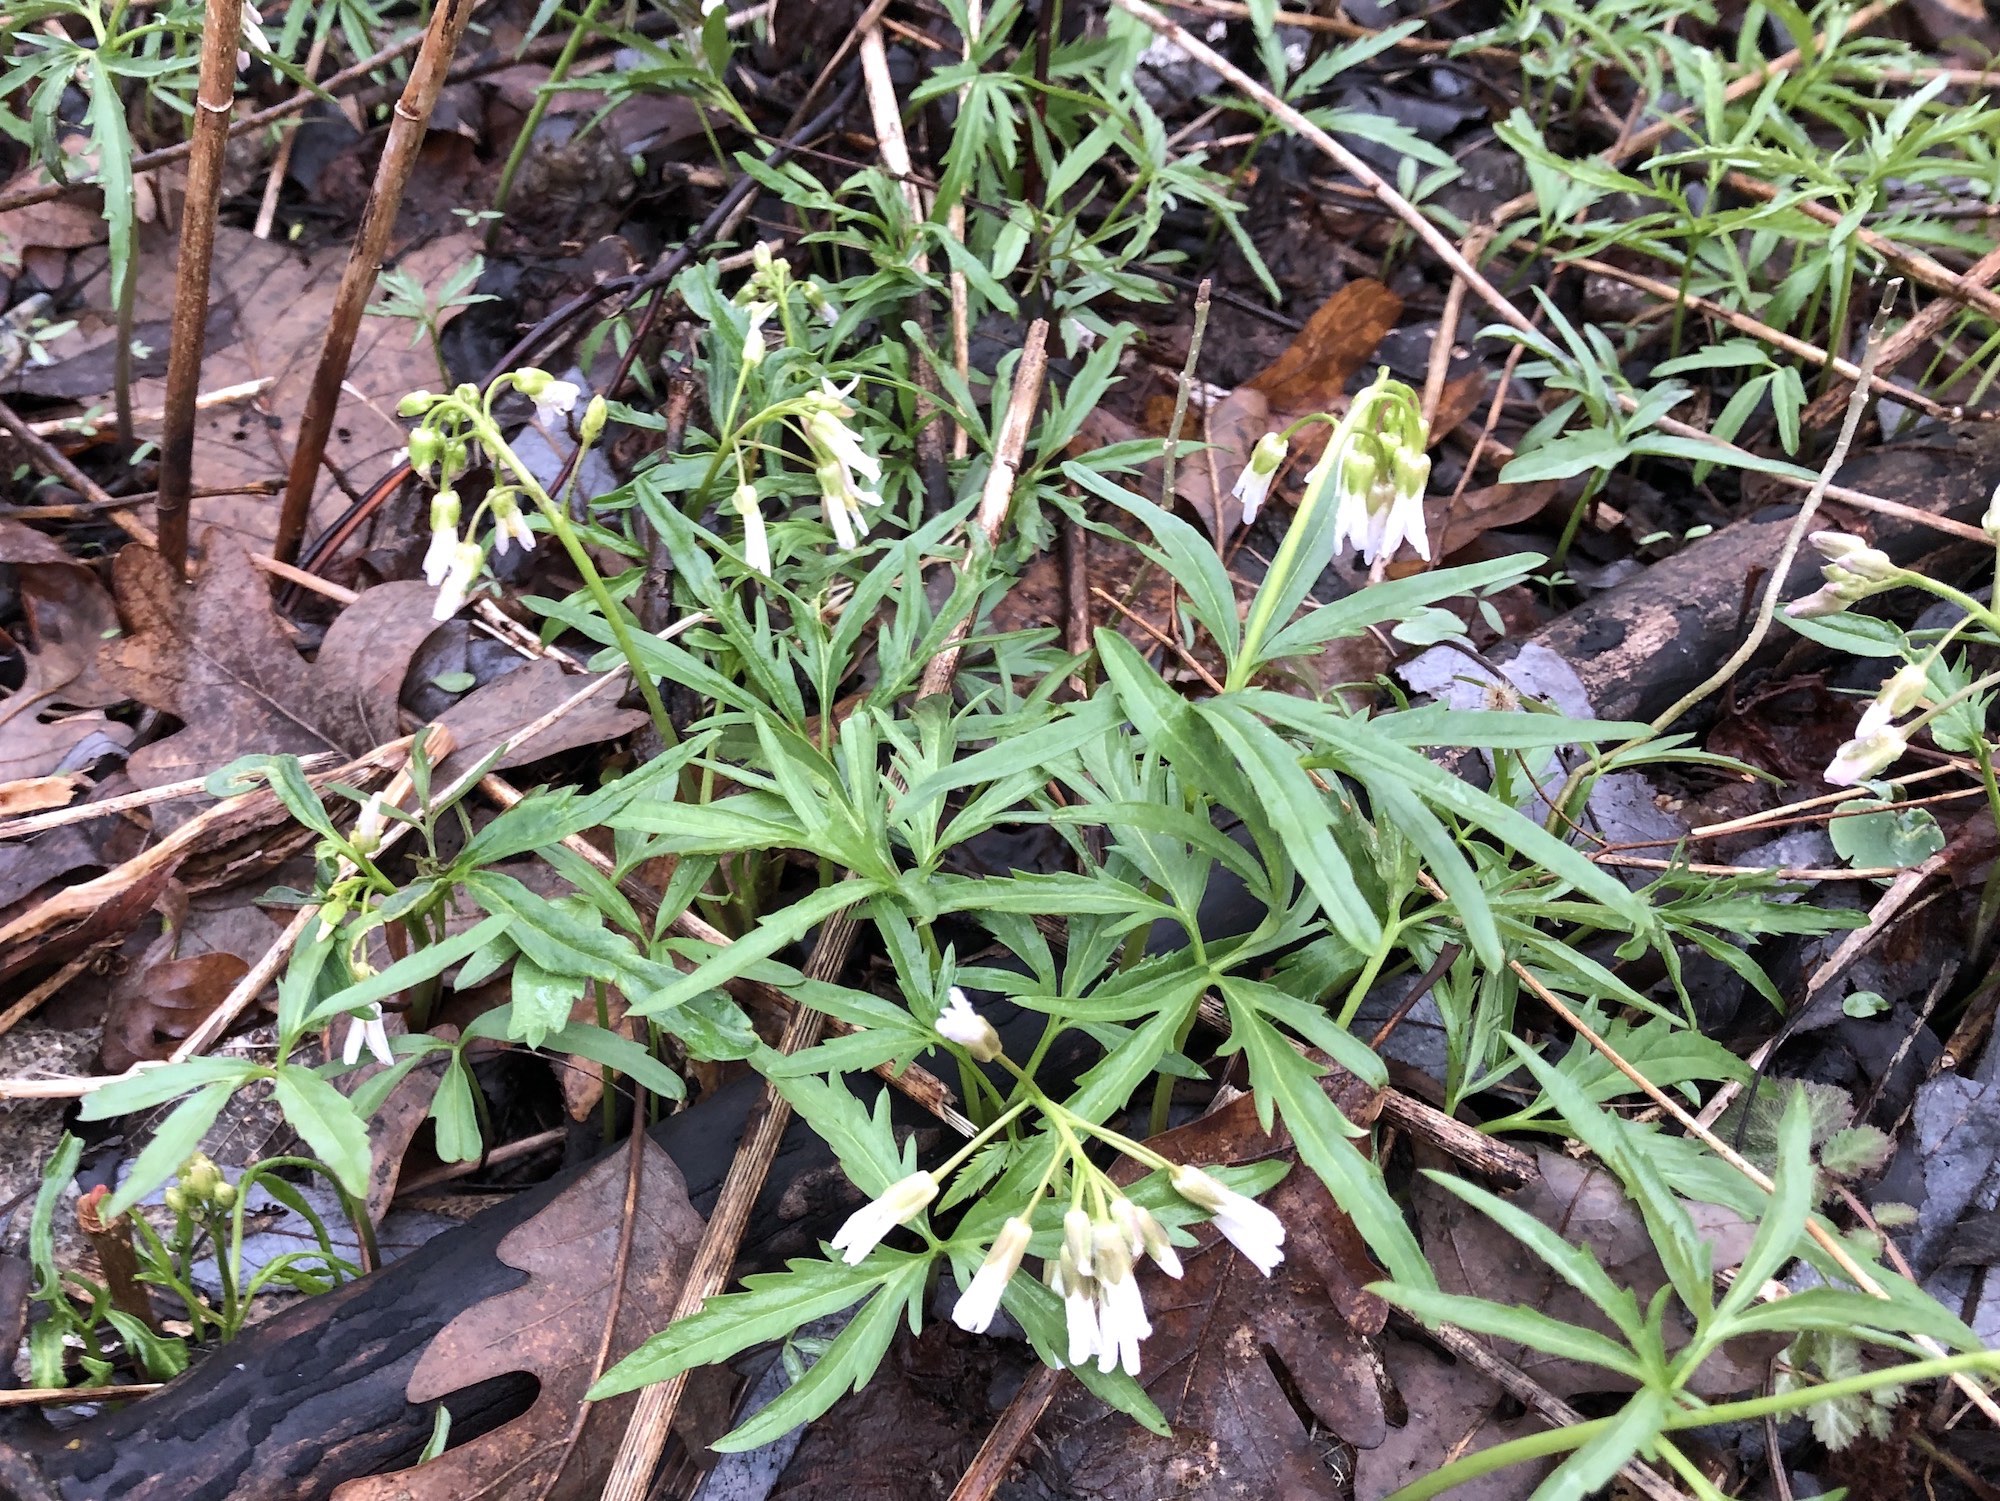 Cutleaf Toothwort near Council Ring Spring on April 12, 2019.